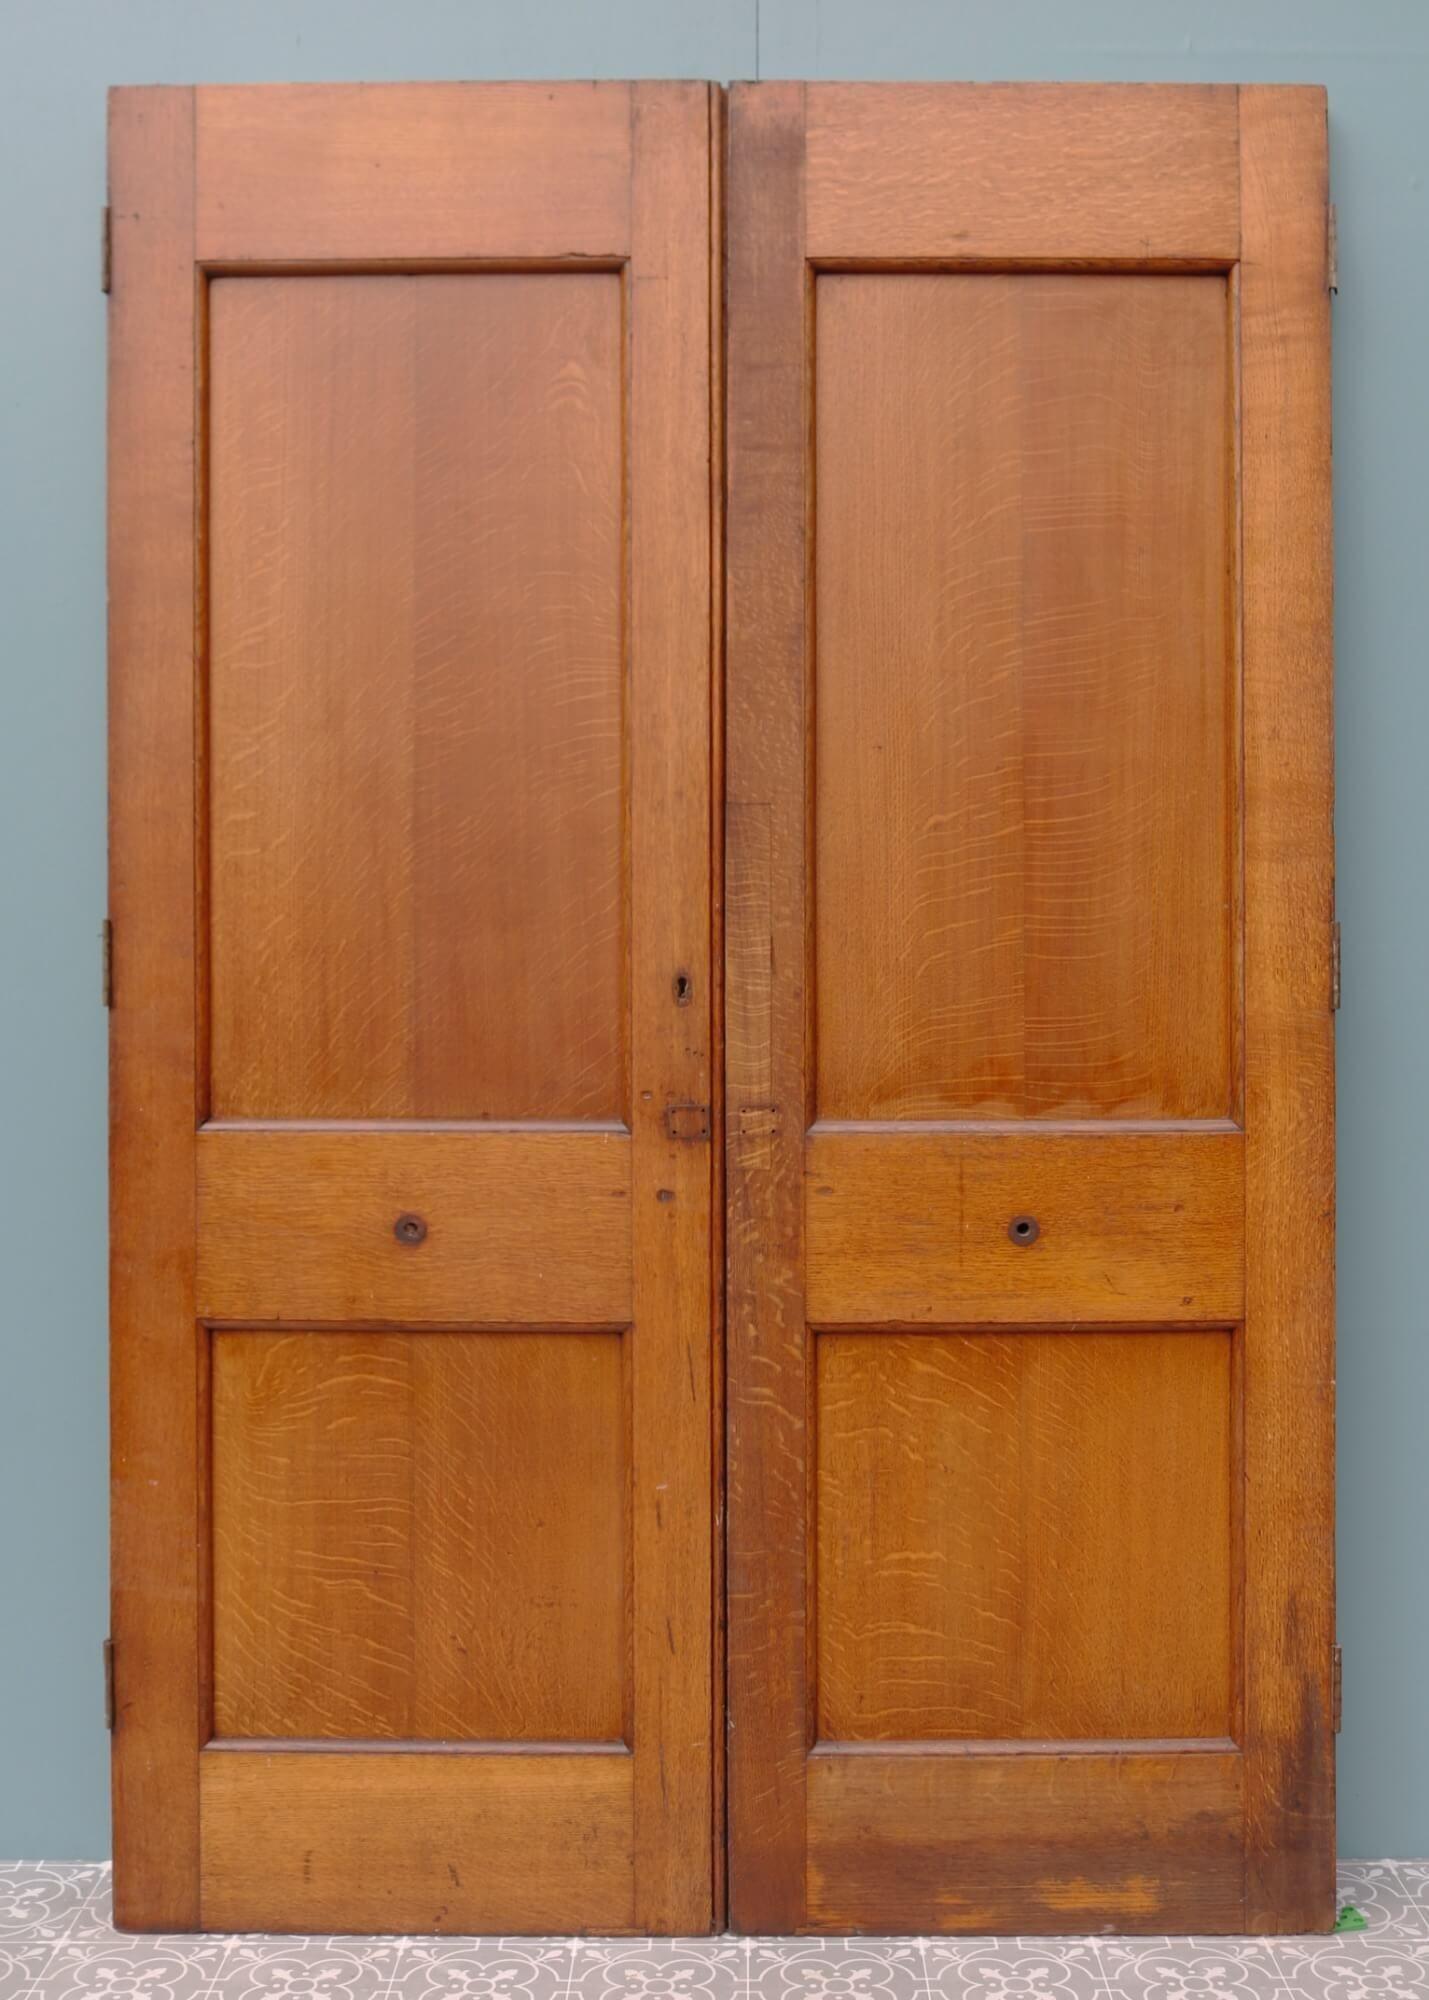 Large Oak Edwardian Double Front Doors In Fair Condition For Sale In Wormelow, Herefordshire